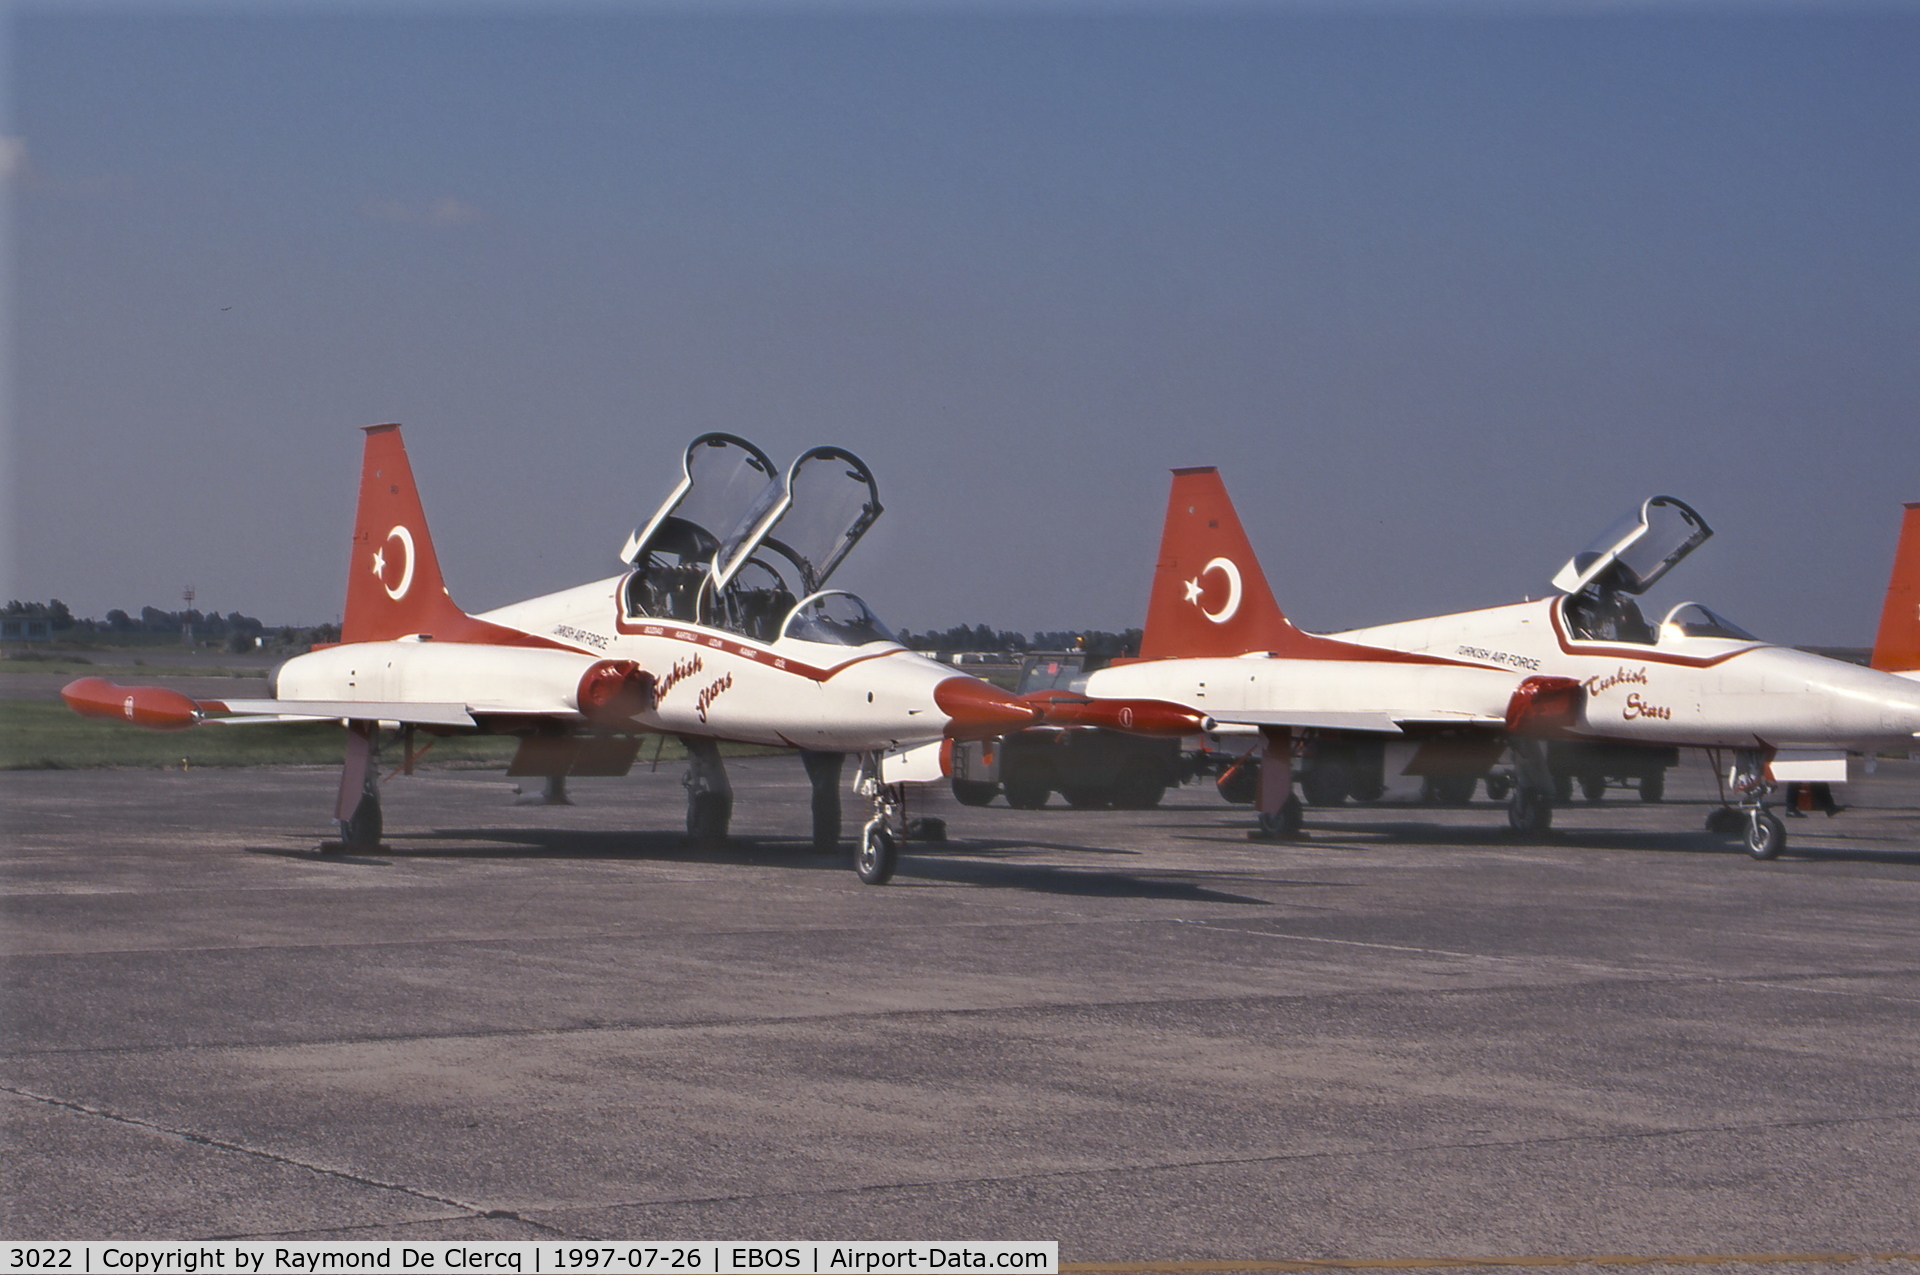 3022, 1970 Canadair NF-5A Freedom Fighter C/N 3022, 3022/1 next to NF-5B 4025/00 at the Ostend airshow 1997.
( aerobatic team Turkish Stars)